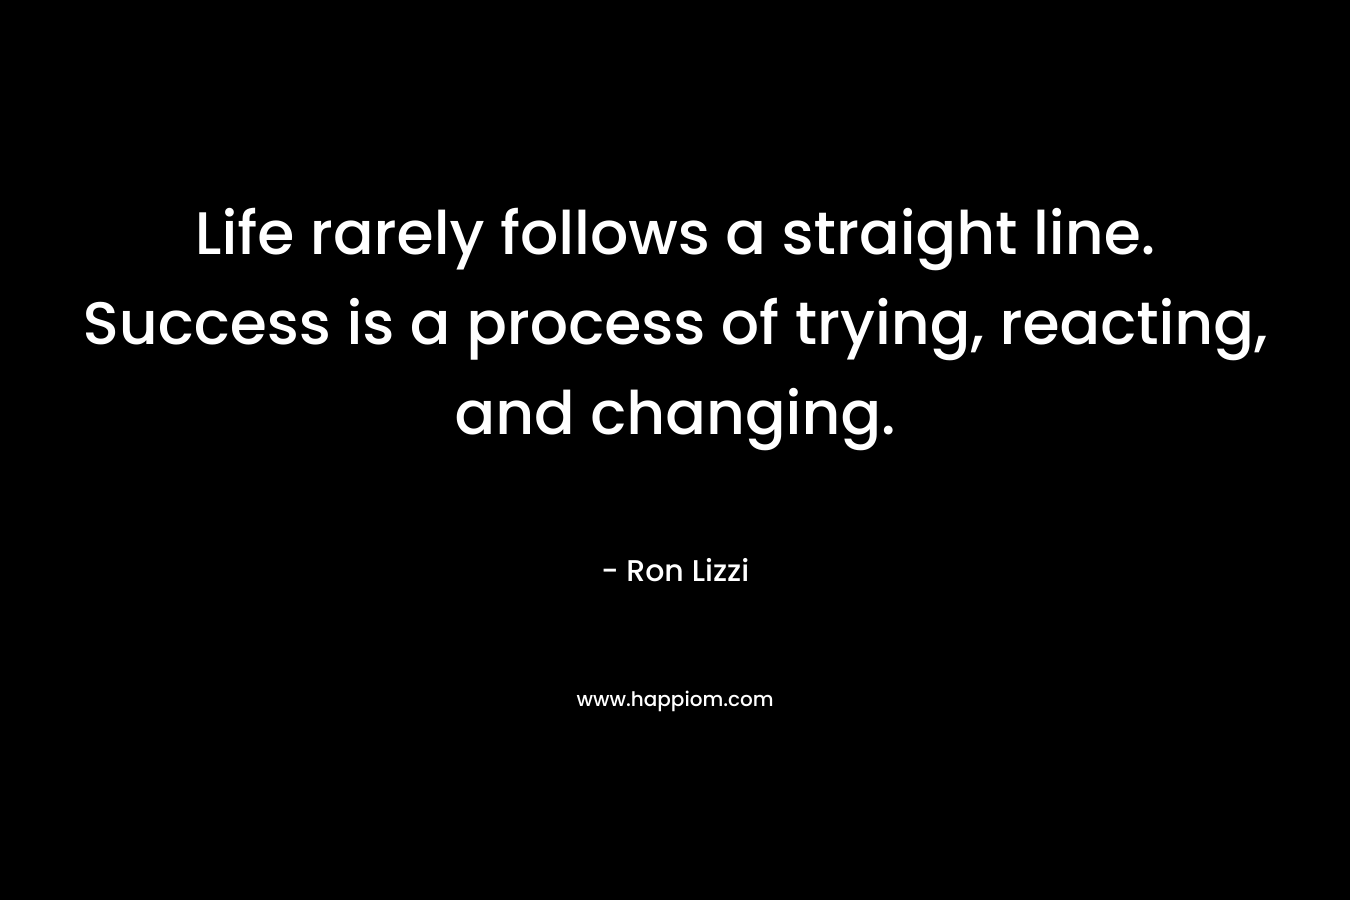 Life rarely follows a straight line. Success is a process of trying, reacting, and changing. – Ron Lizzi